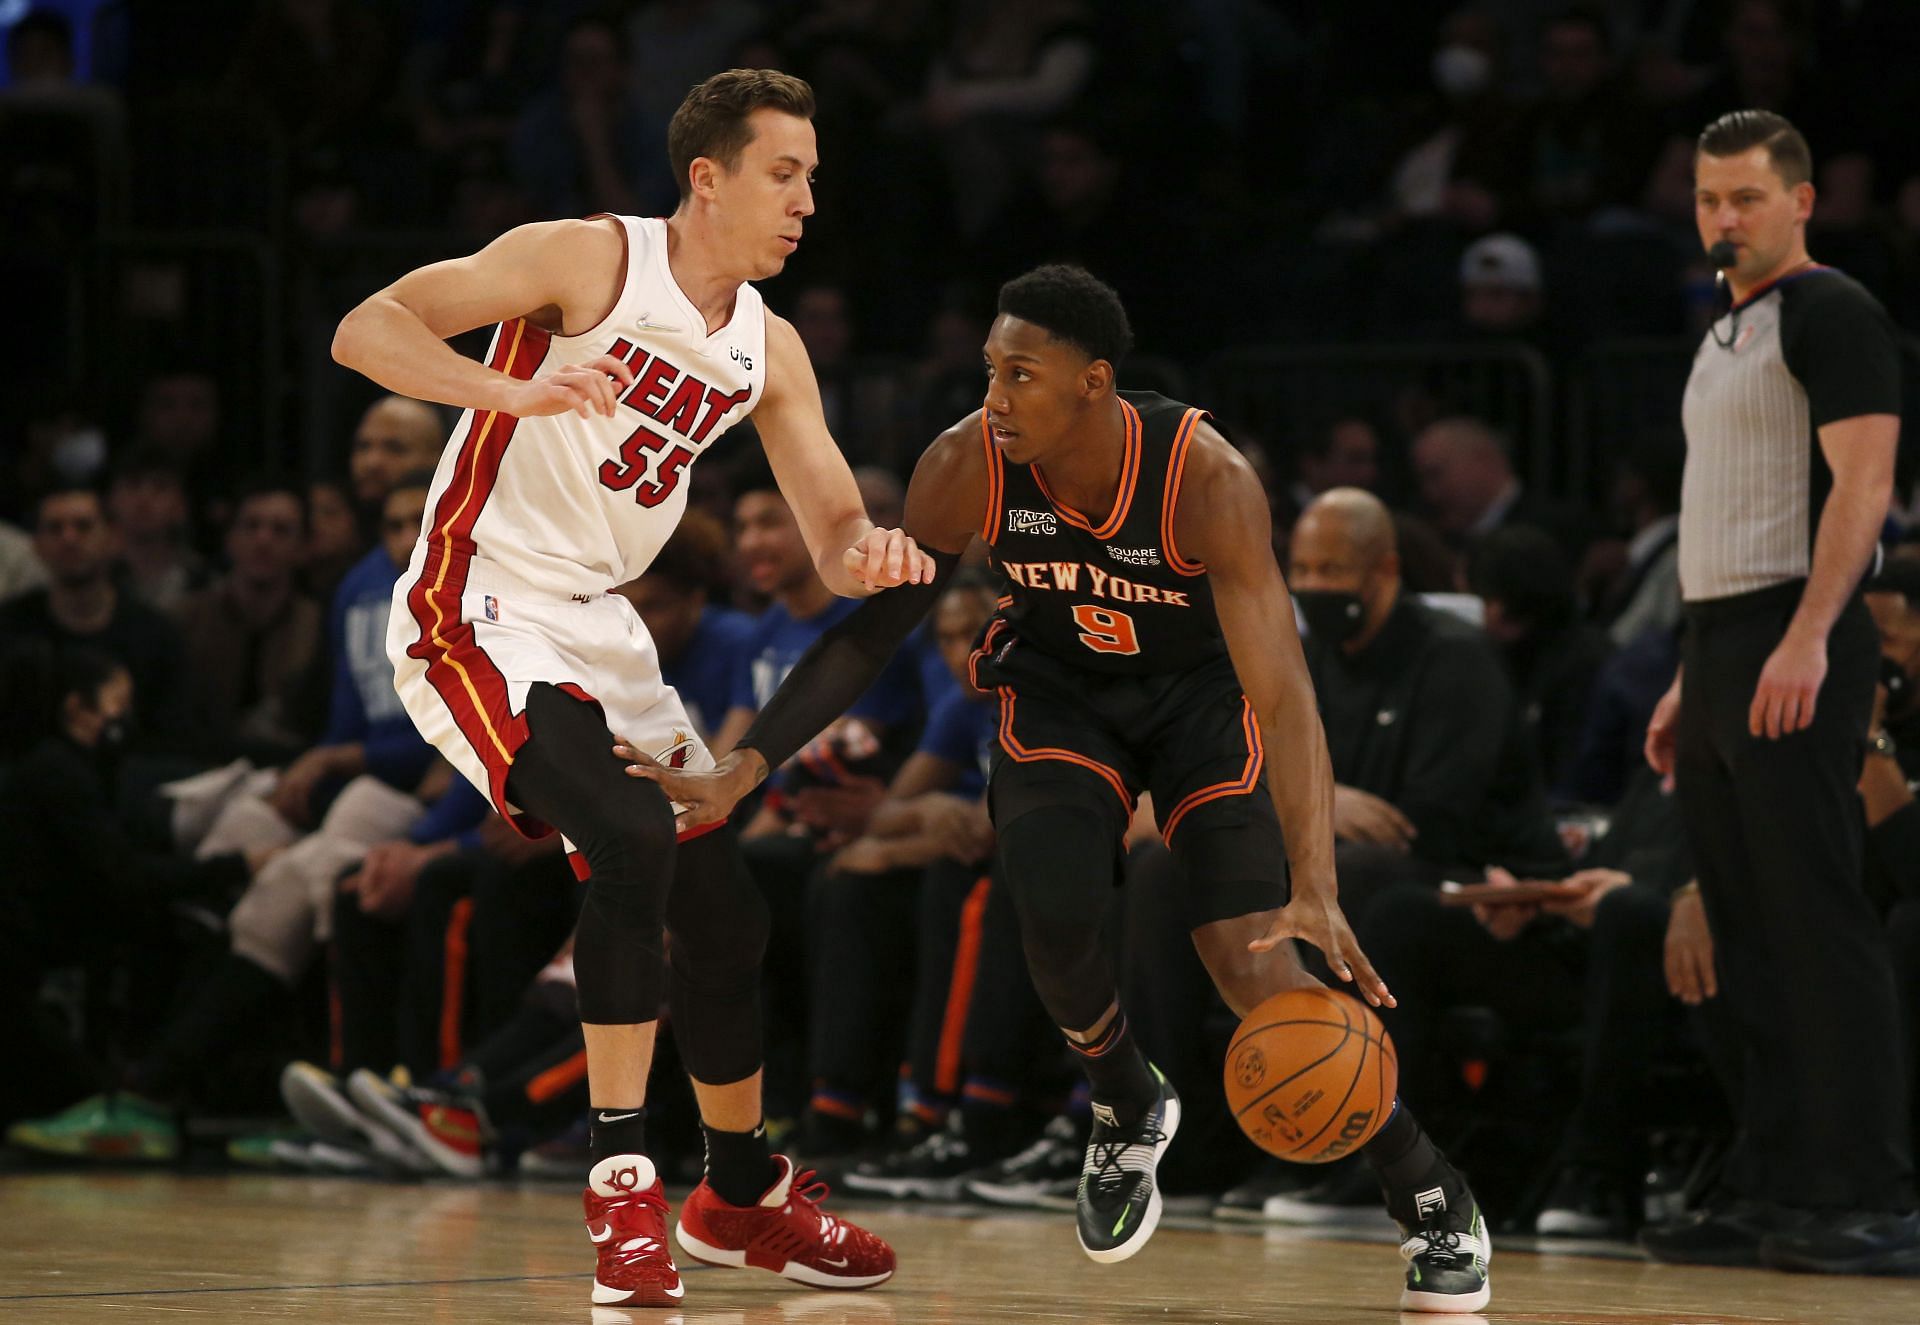 Miami Heat will lock horns with the New York Knicks on Friday